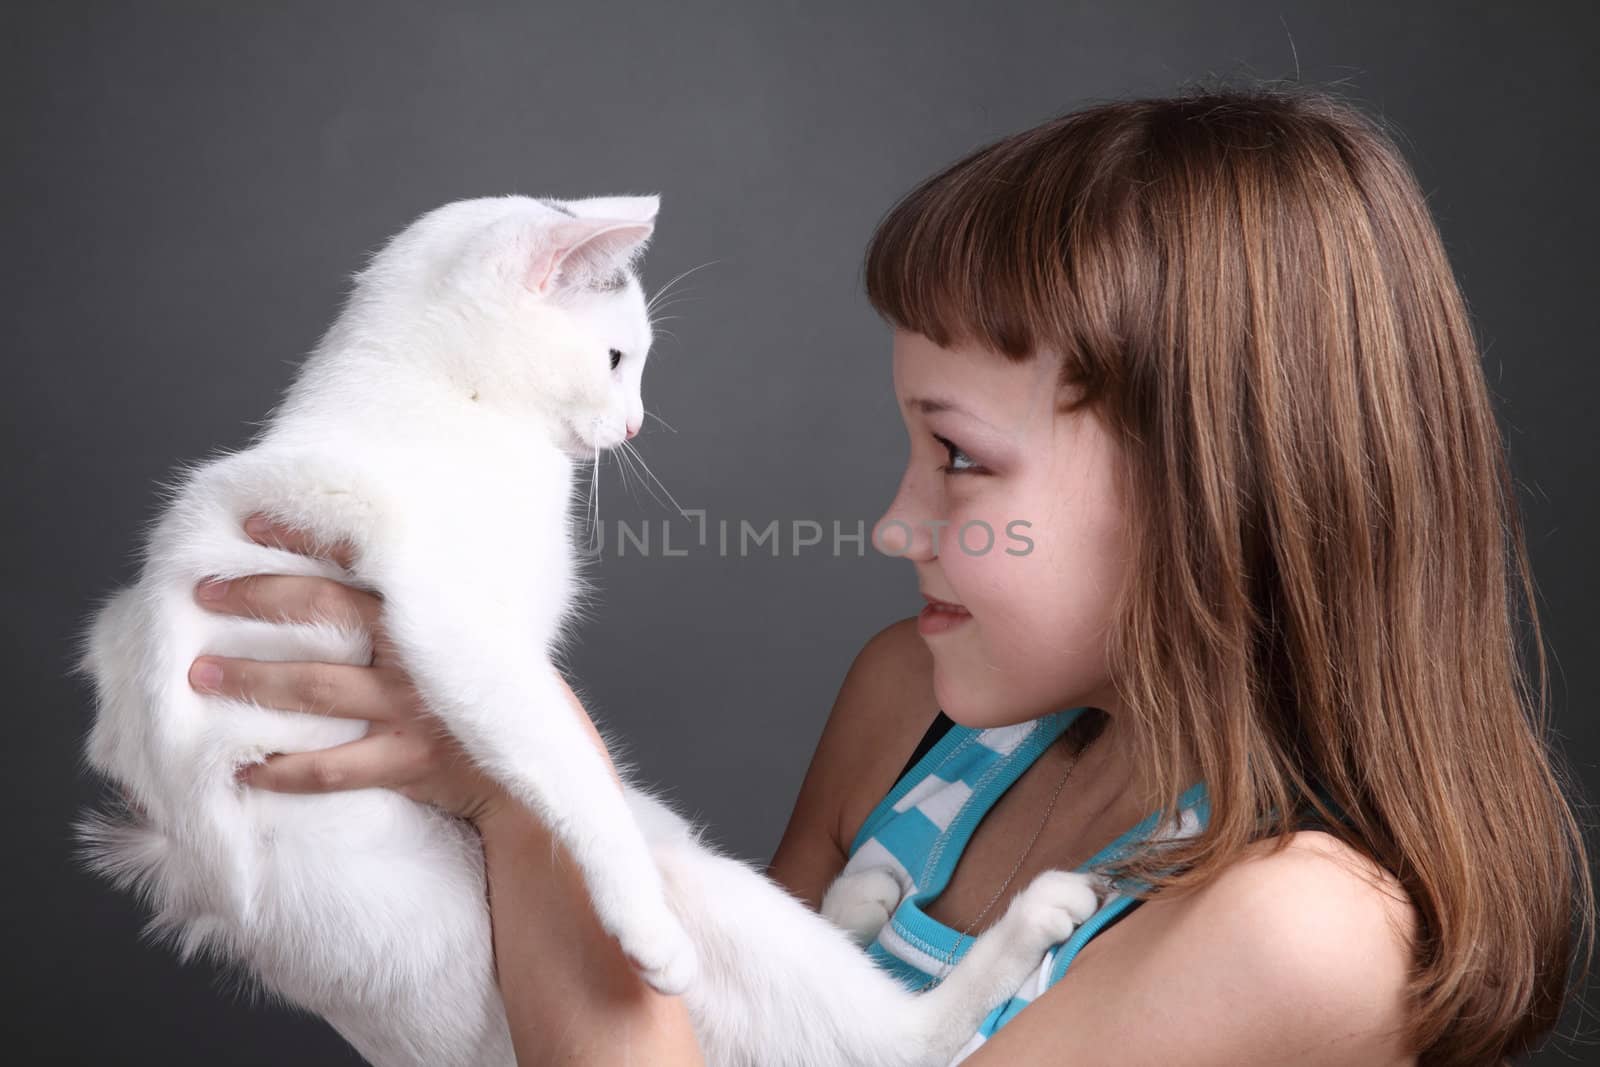 the girl and white cat play. close up. double 13